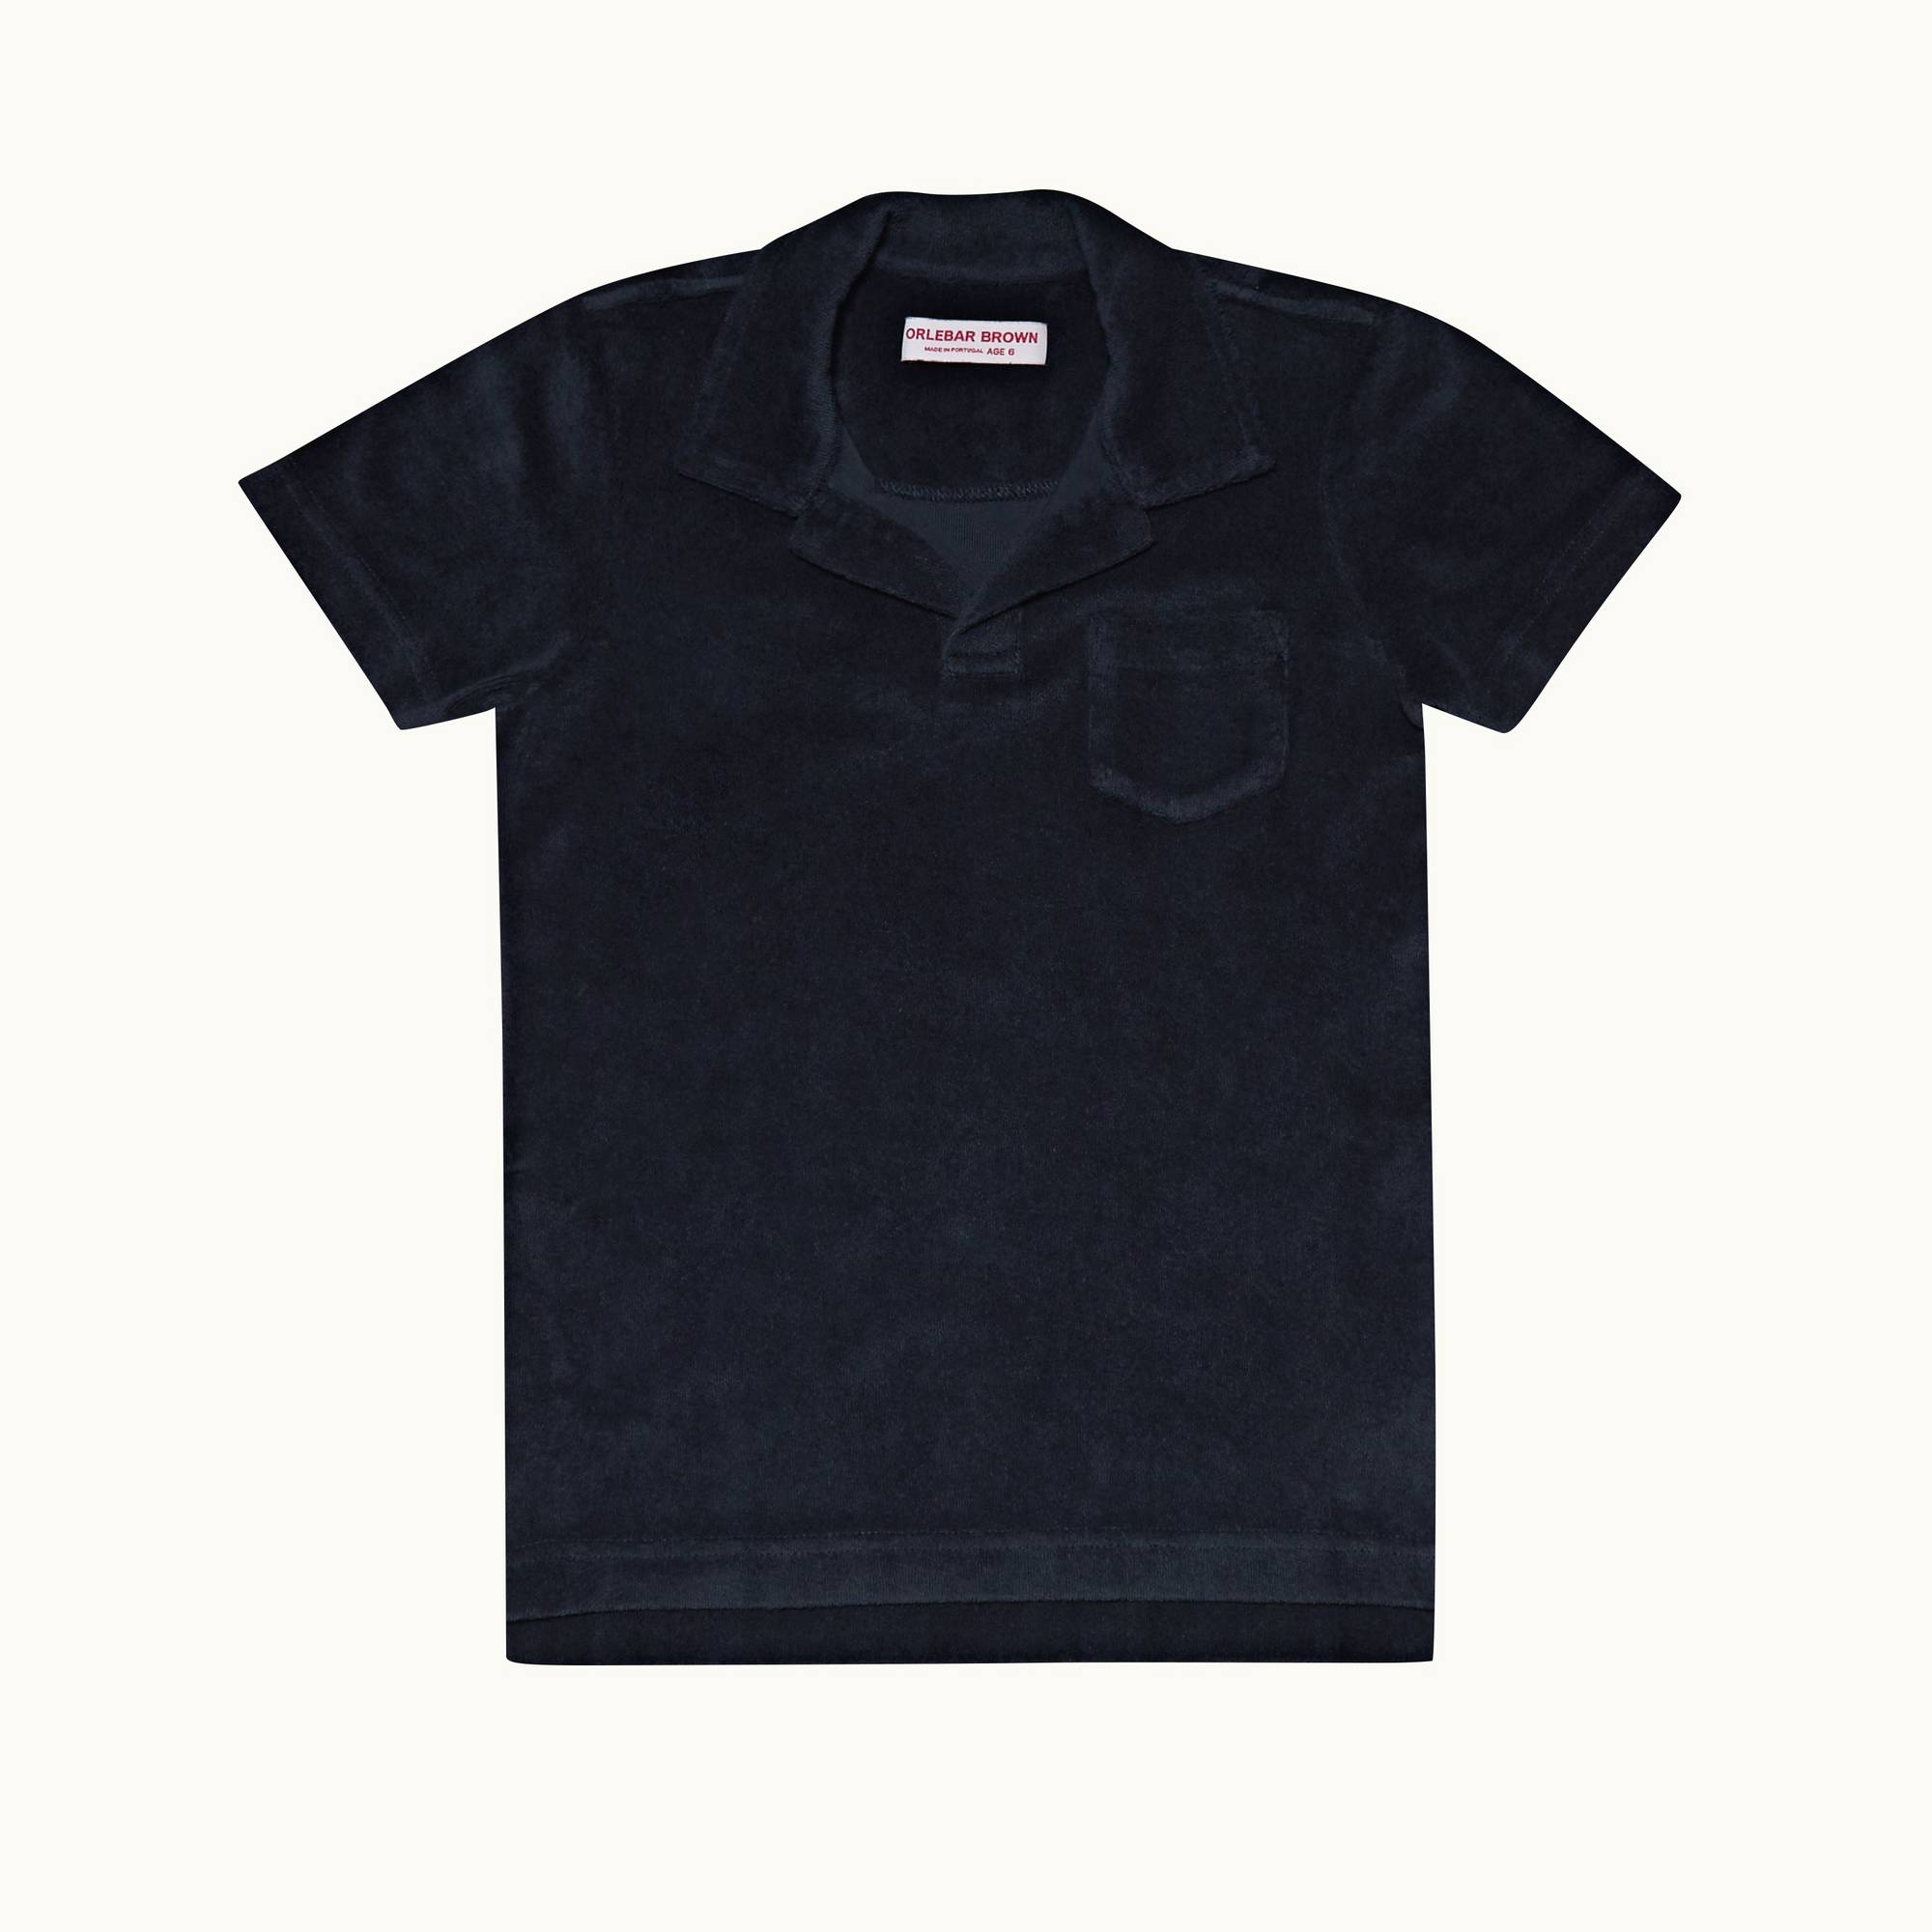 Digby Towelling - Childrens Kids' Navy Organic Towelling Resort Polo Shirt